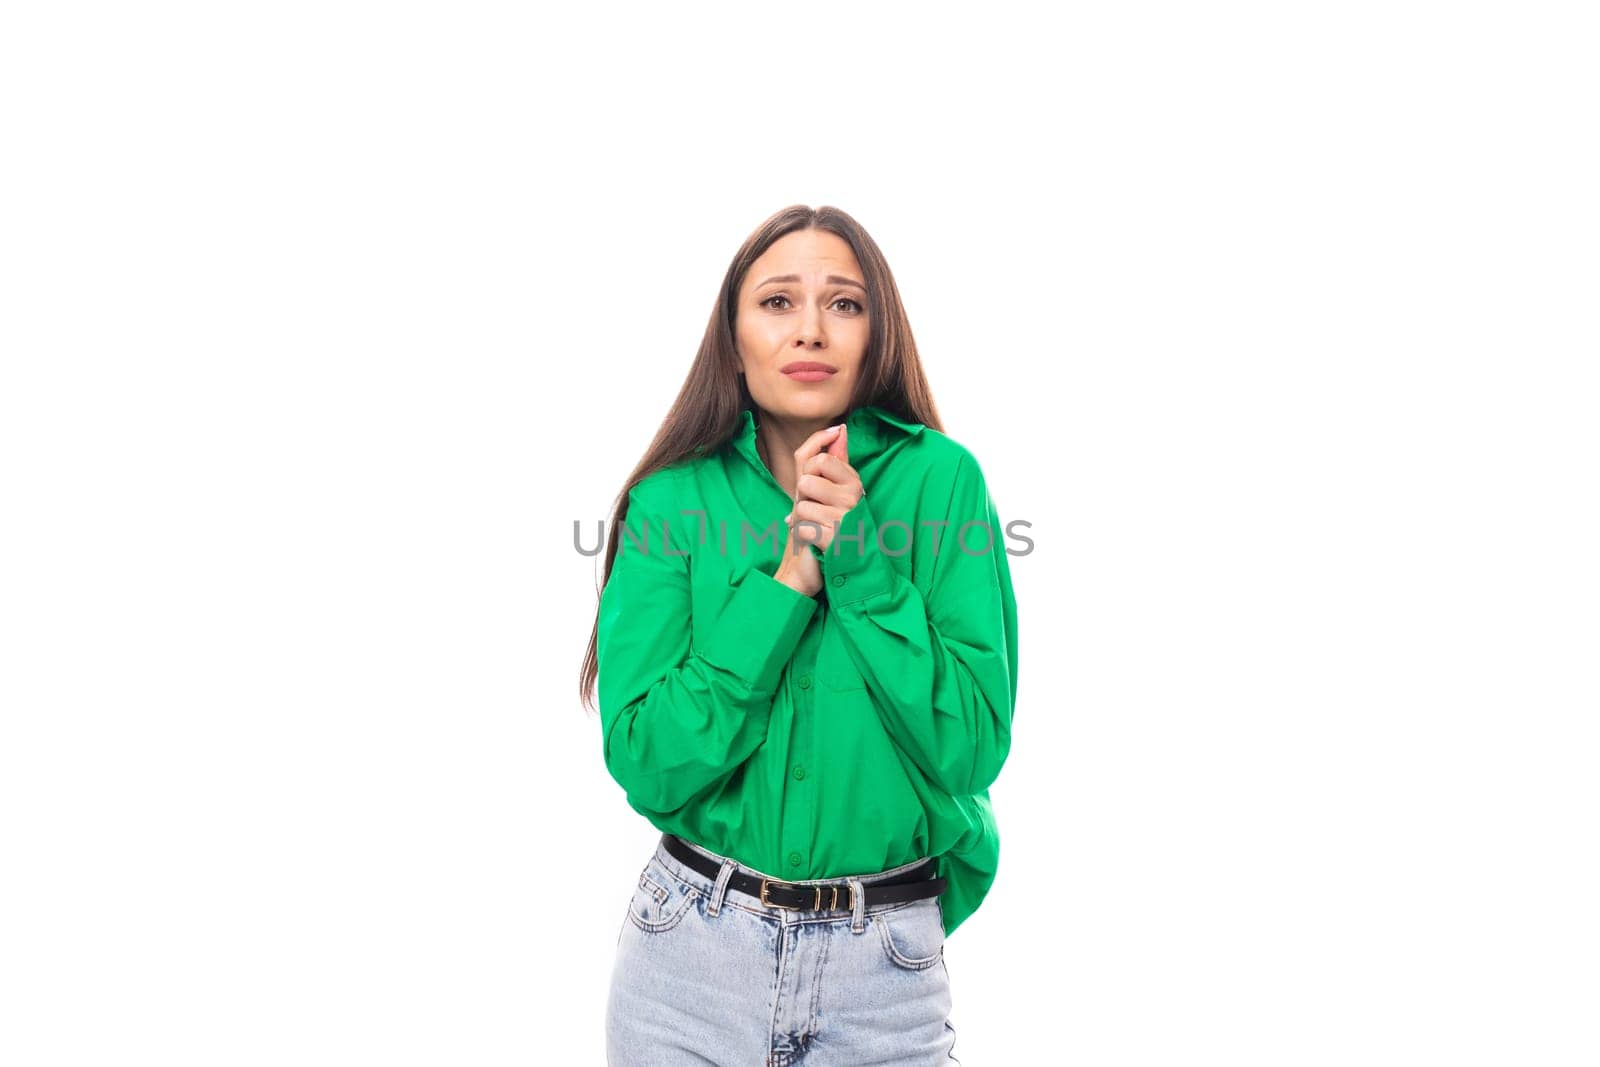 modest well-groomed brunette long-haired young woman in a green shirt on a white background with copy space.